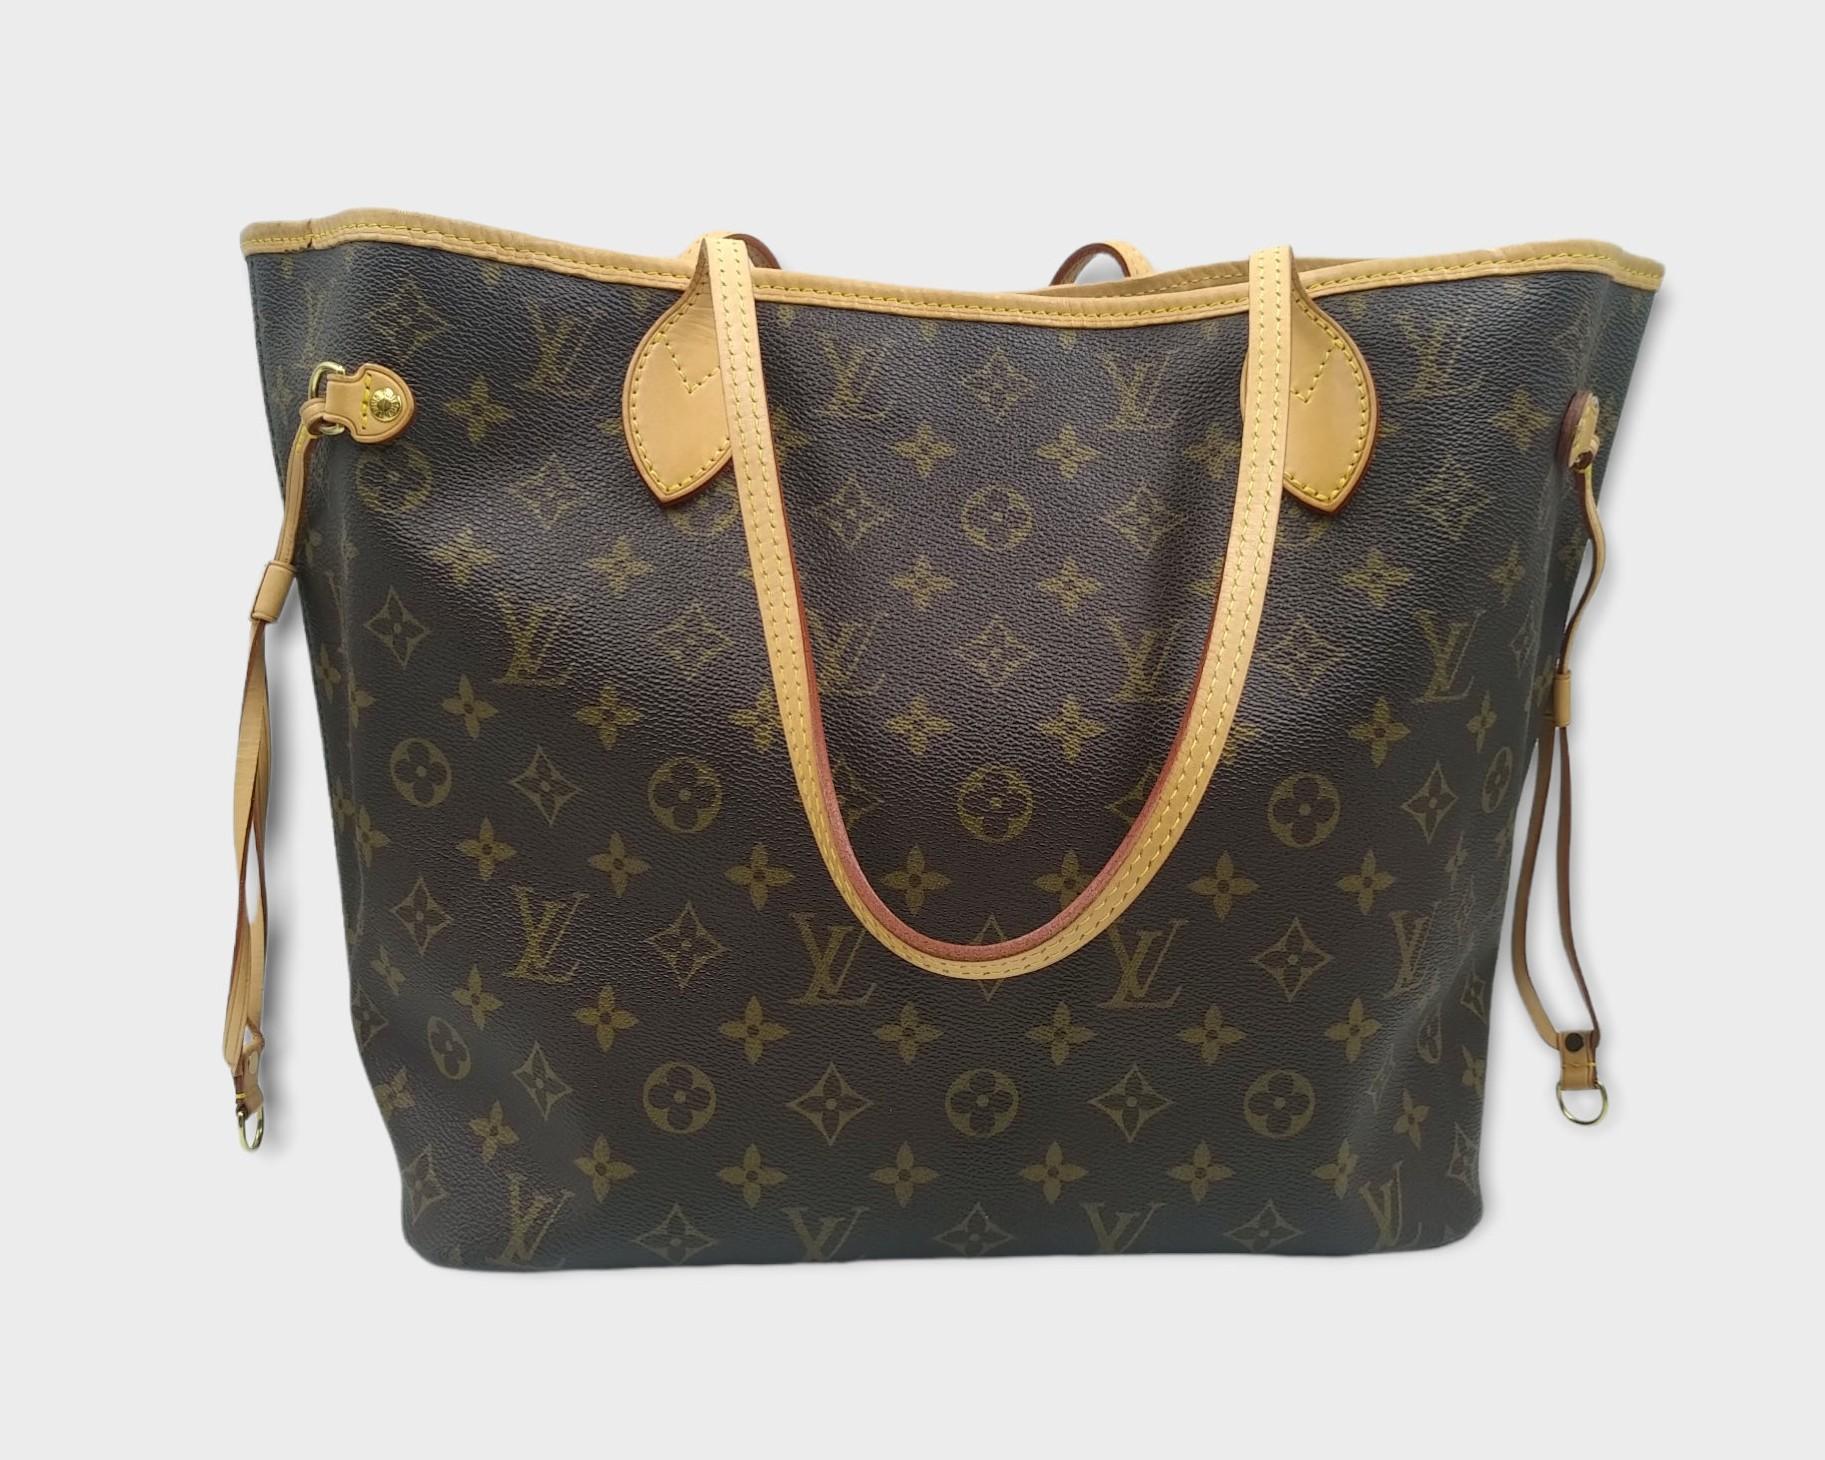 Louis Vuitton Monogram Canvas Neverfull PM Bag, 2007
- 100% authentic Louis Vuitton
- Monogram coated canvas with natural cowhide leather trim
- Double flat leather shoulder straps
- Open top with clasped ban middle hook
- Louis Vuitton canvas